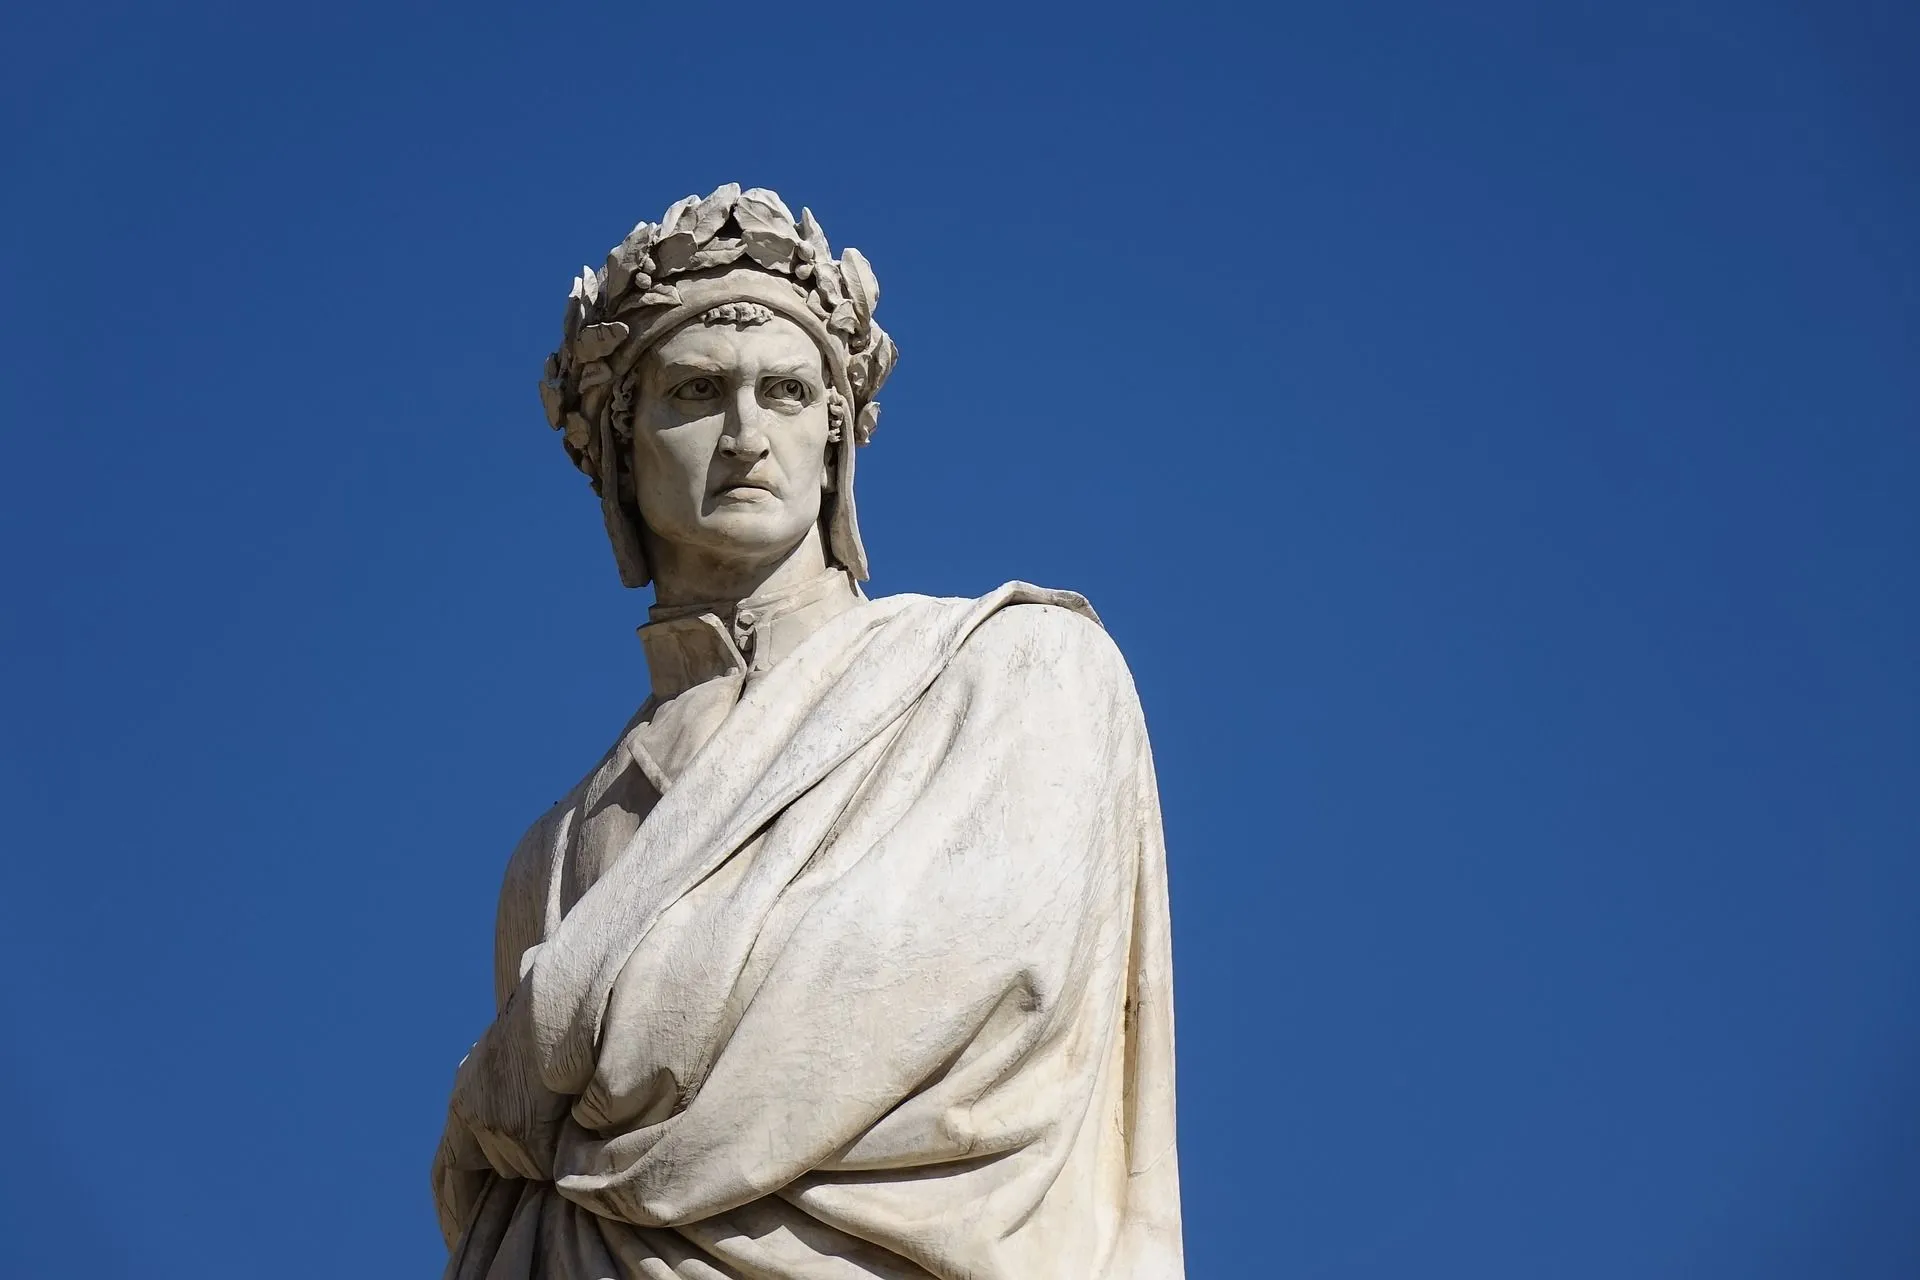 The city of Florence was Dante's birthplace.